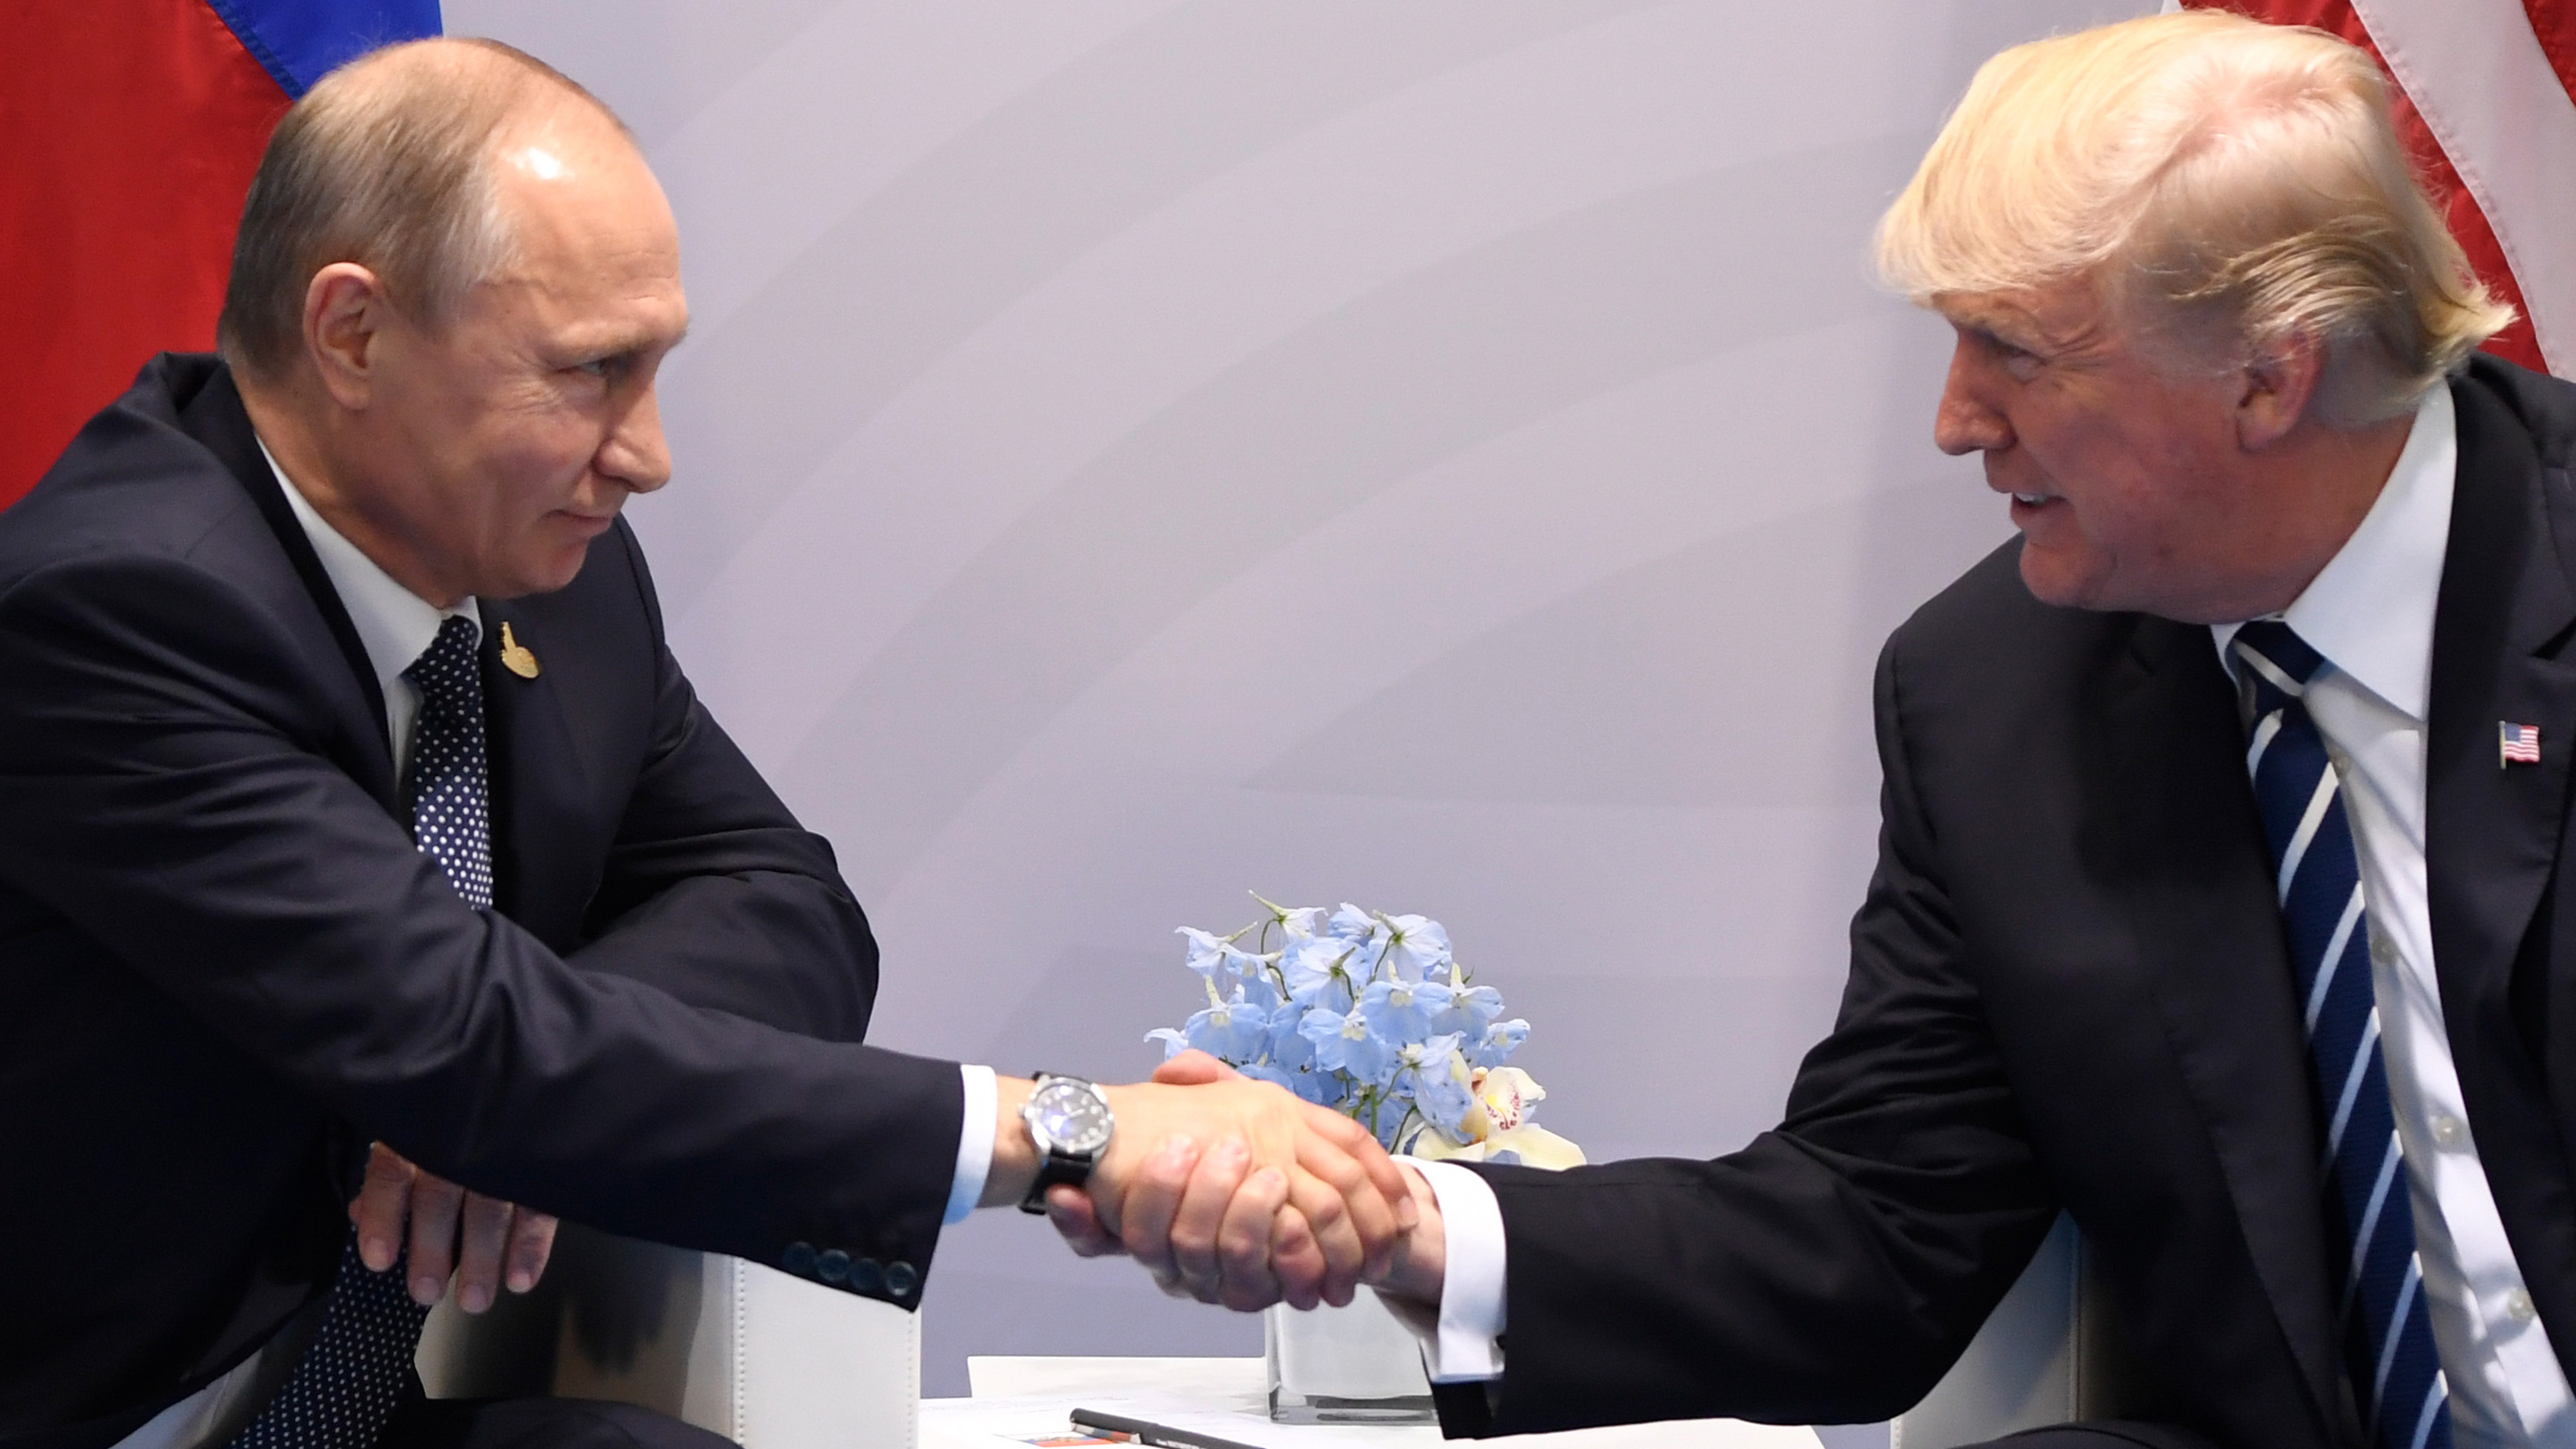 U.S. President Donald Trump and Russia's President Vladimir Putin shake hands during a meeting on the sidelines of the G20 Summit in Hamburg, Germany, on July 7, 2017. (Saul Loeb—AFP/Getty Images)